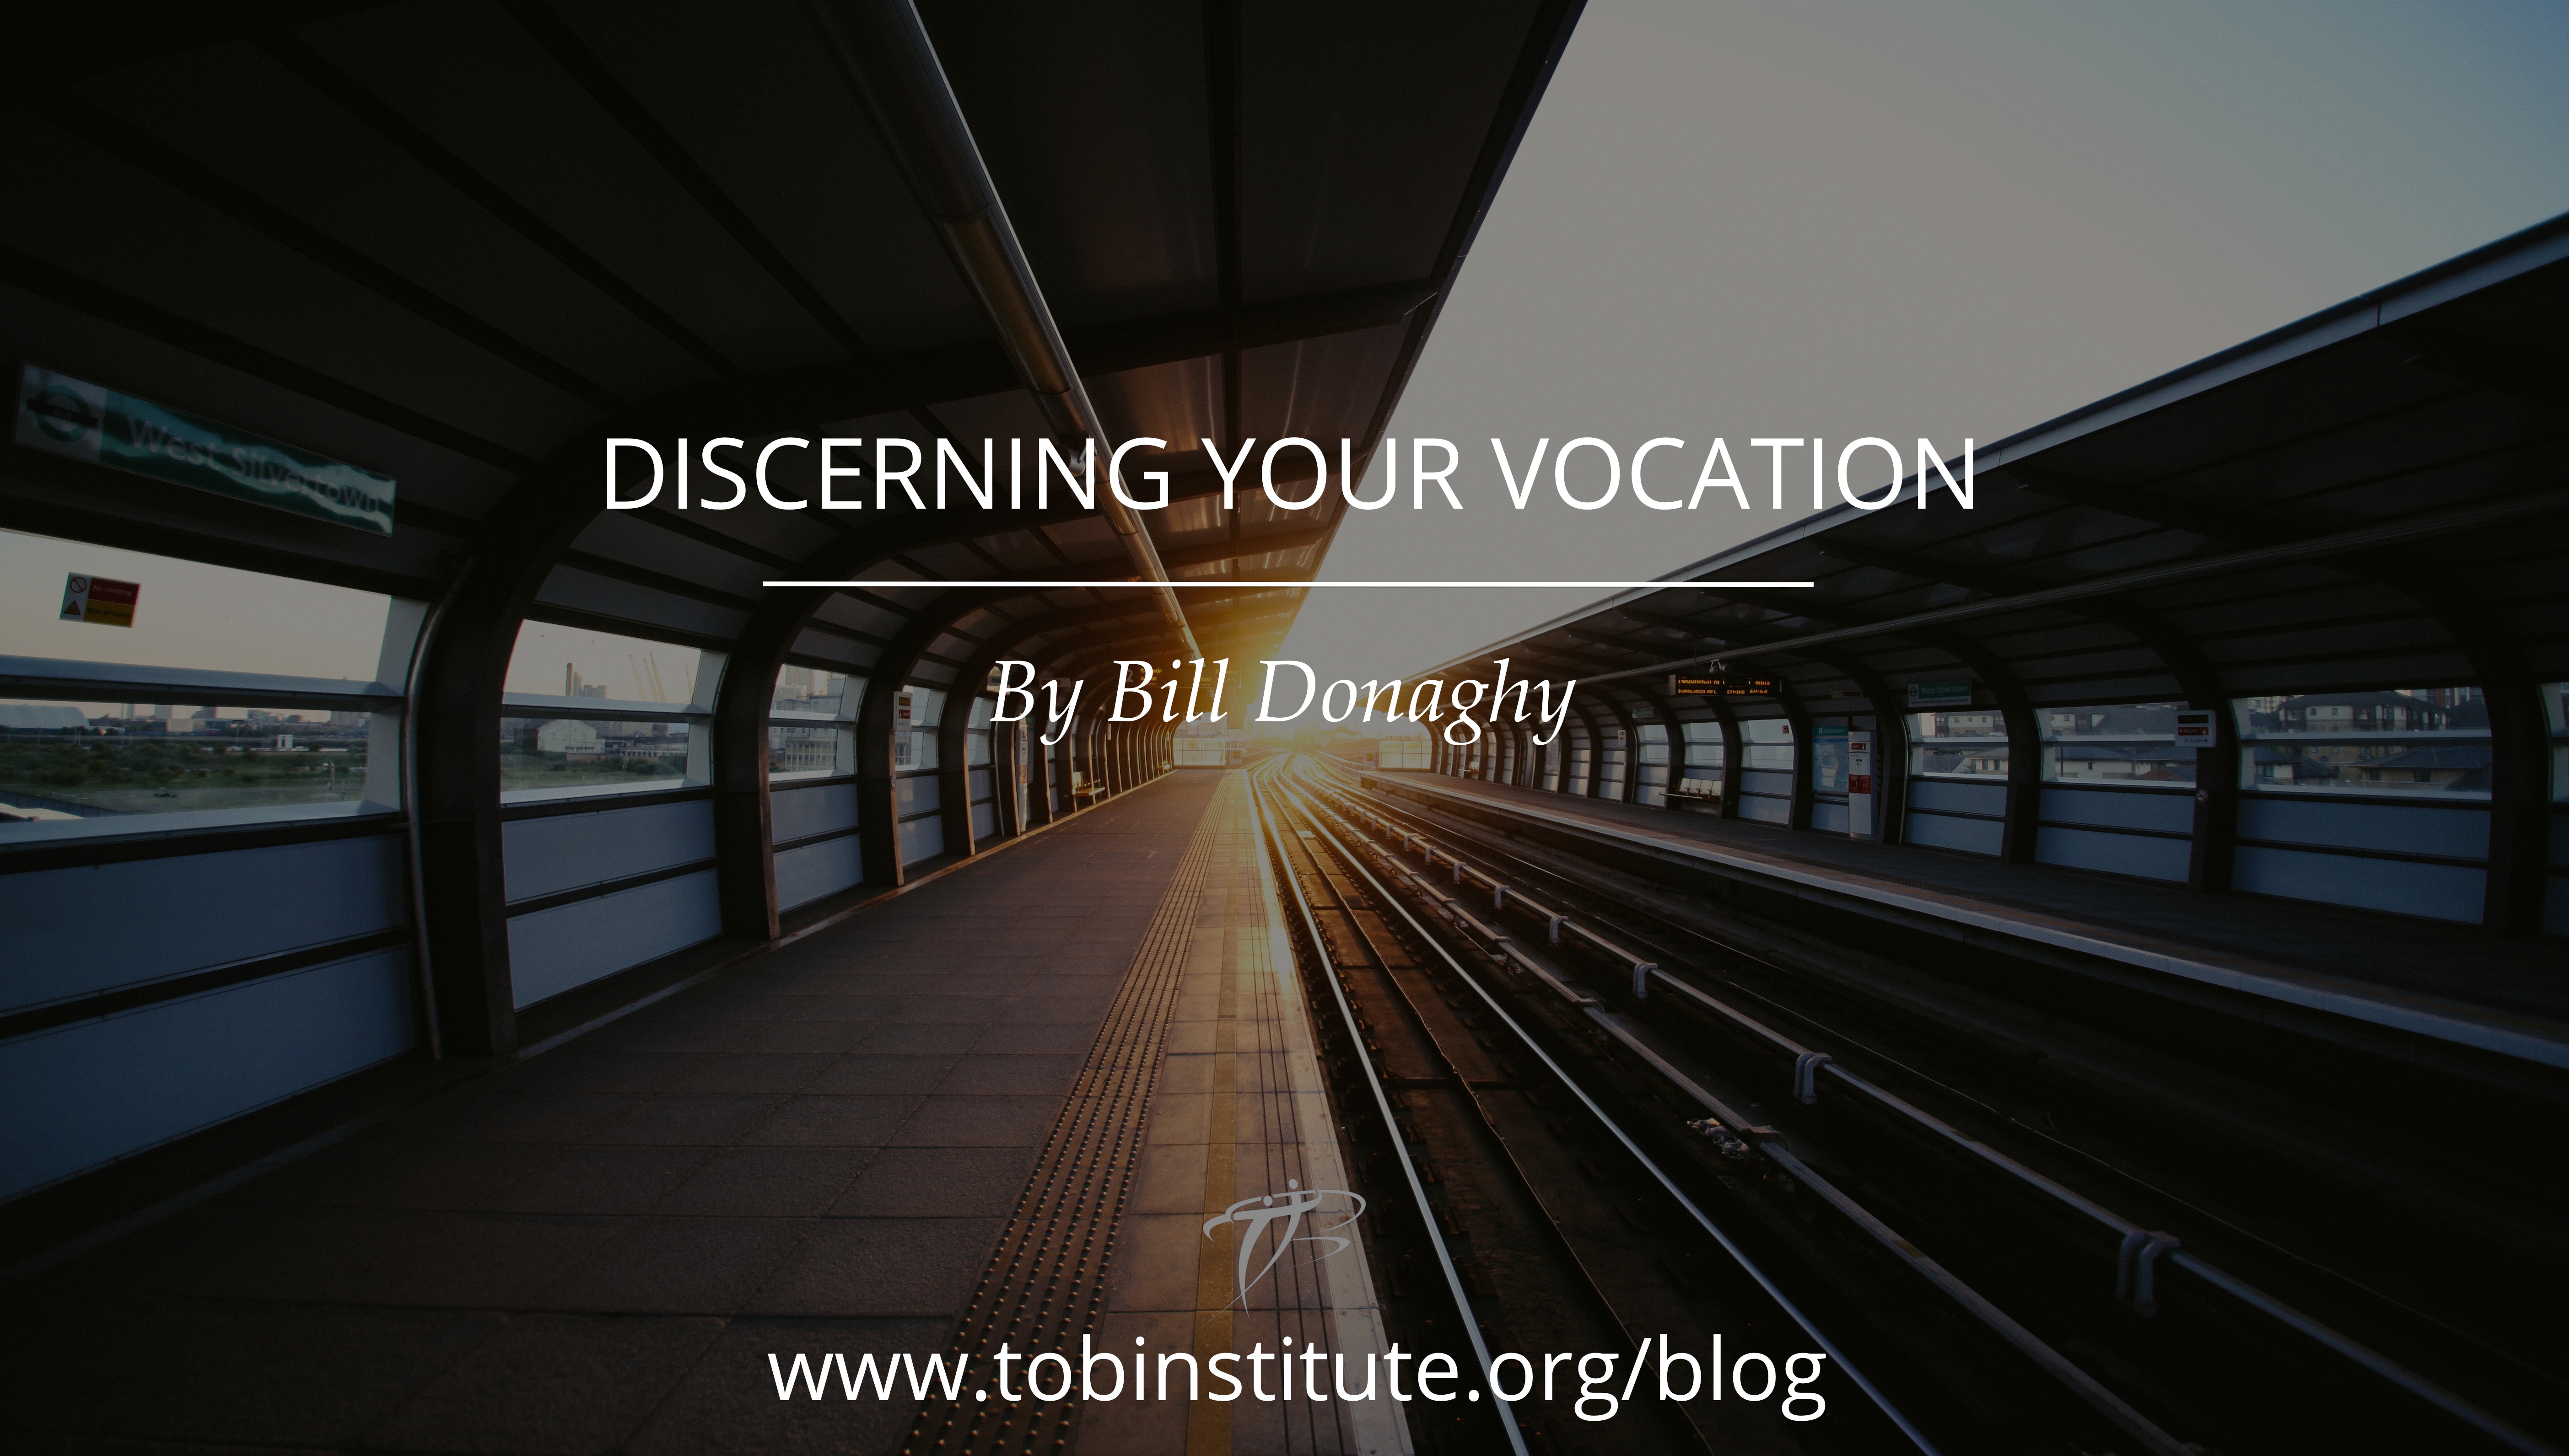 Vocation is Your Gift